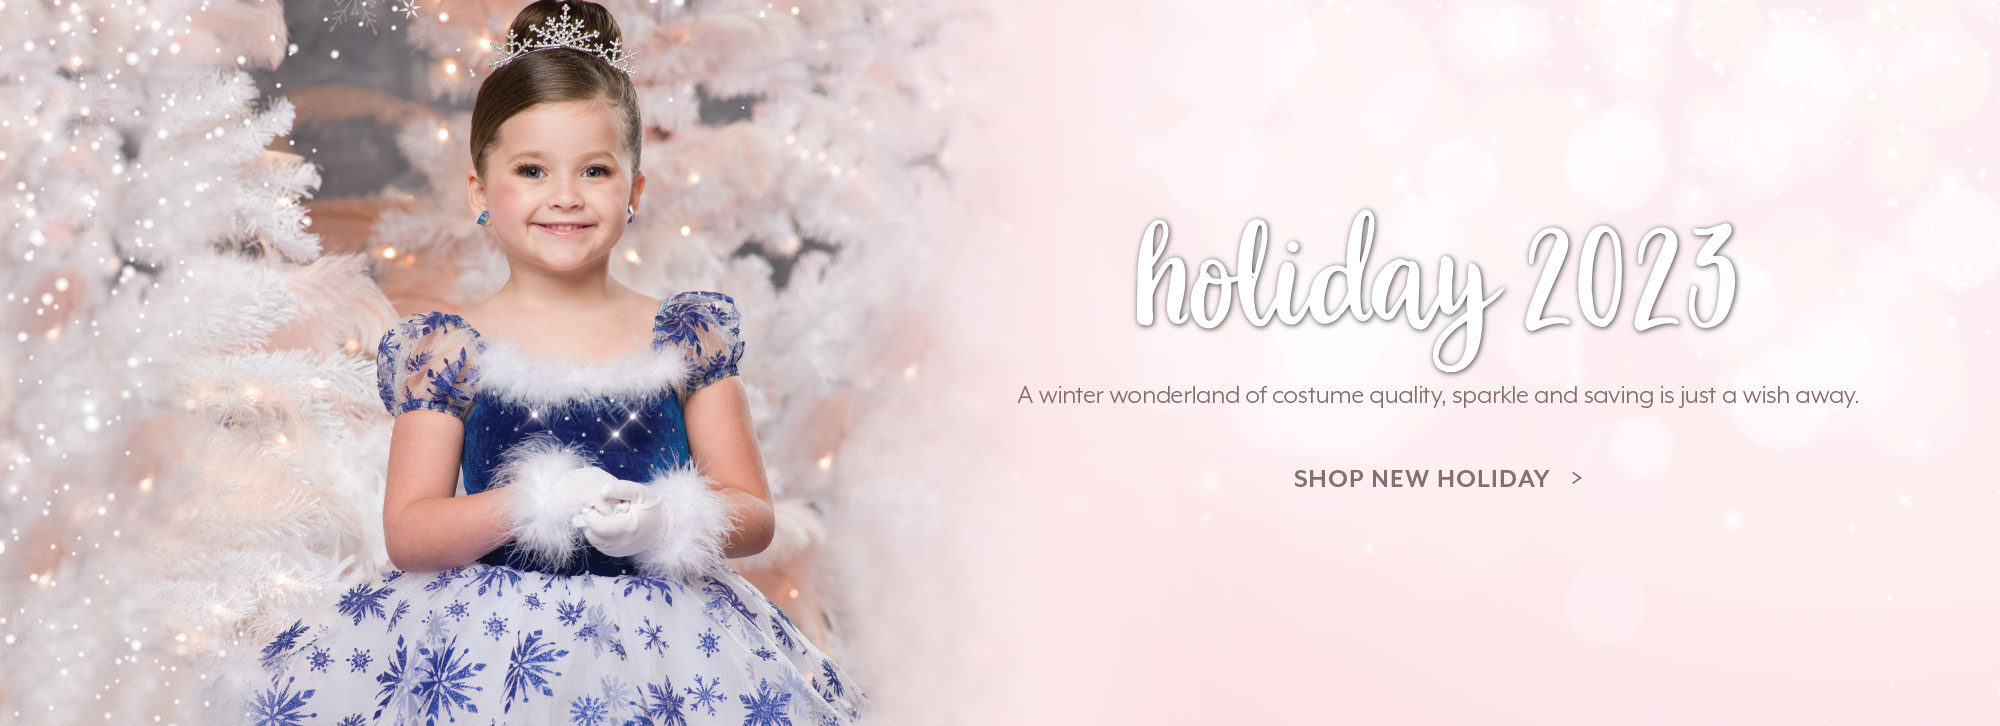 Shop new holiday costumes!